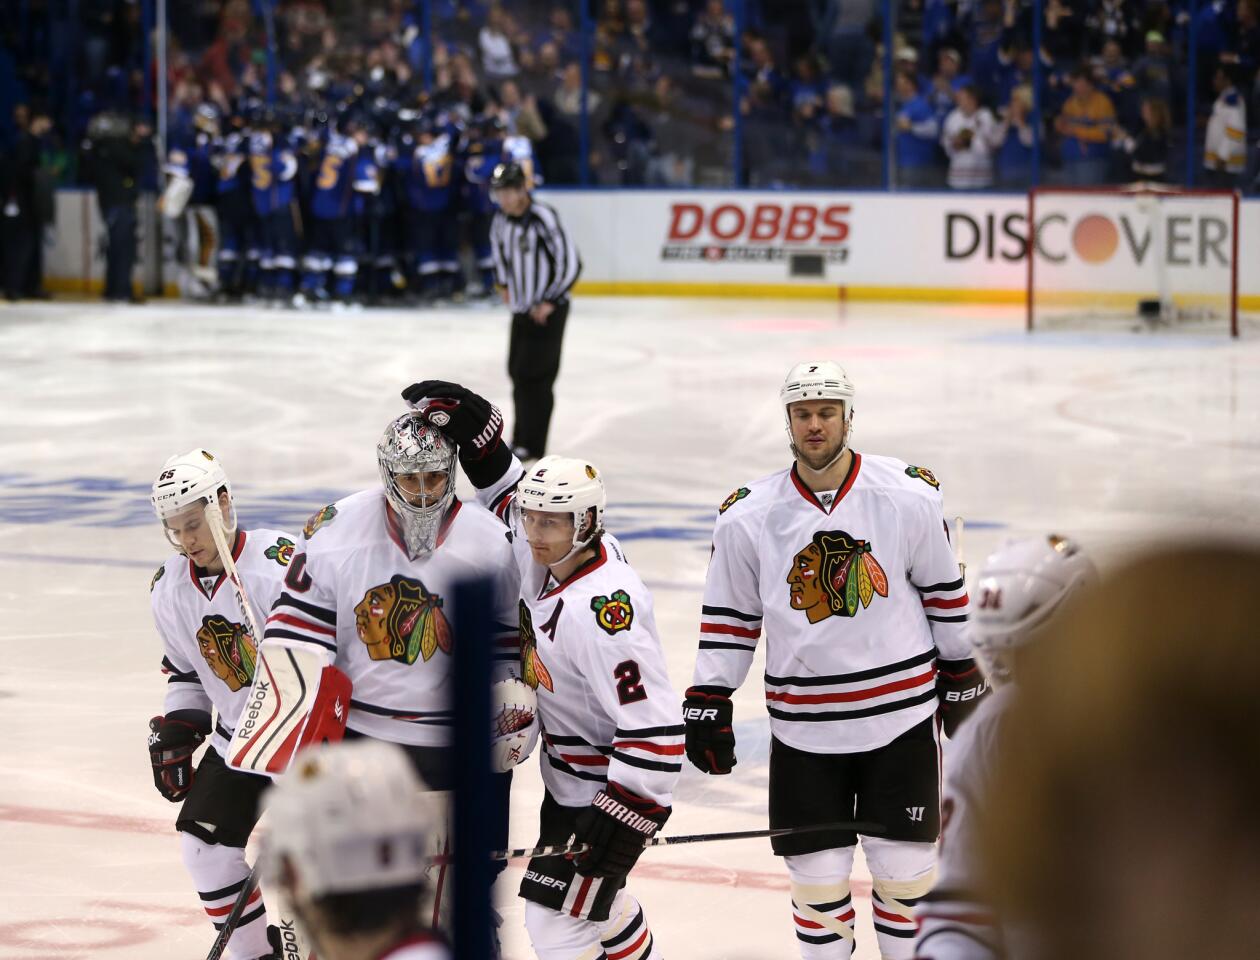 Blackhawks goalie Corey Crawford is consoled by Duncan Keith as the Blues celebrate their victory in triple overtime.